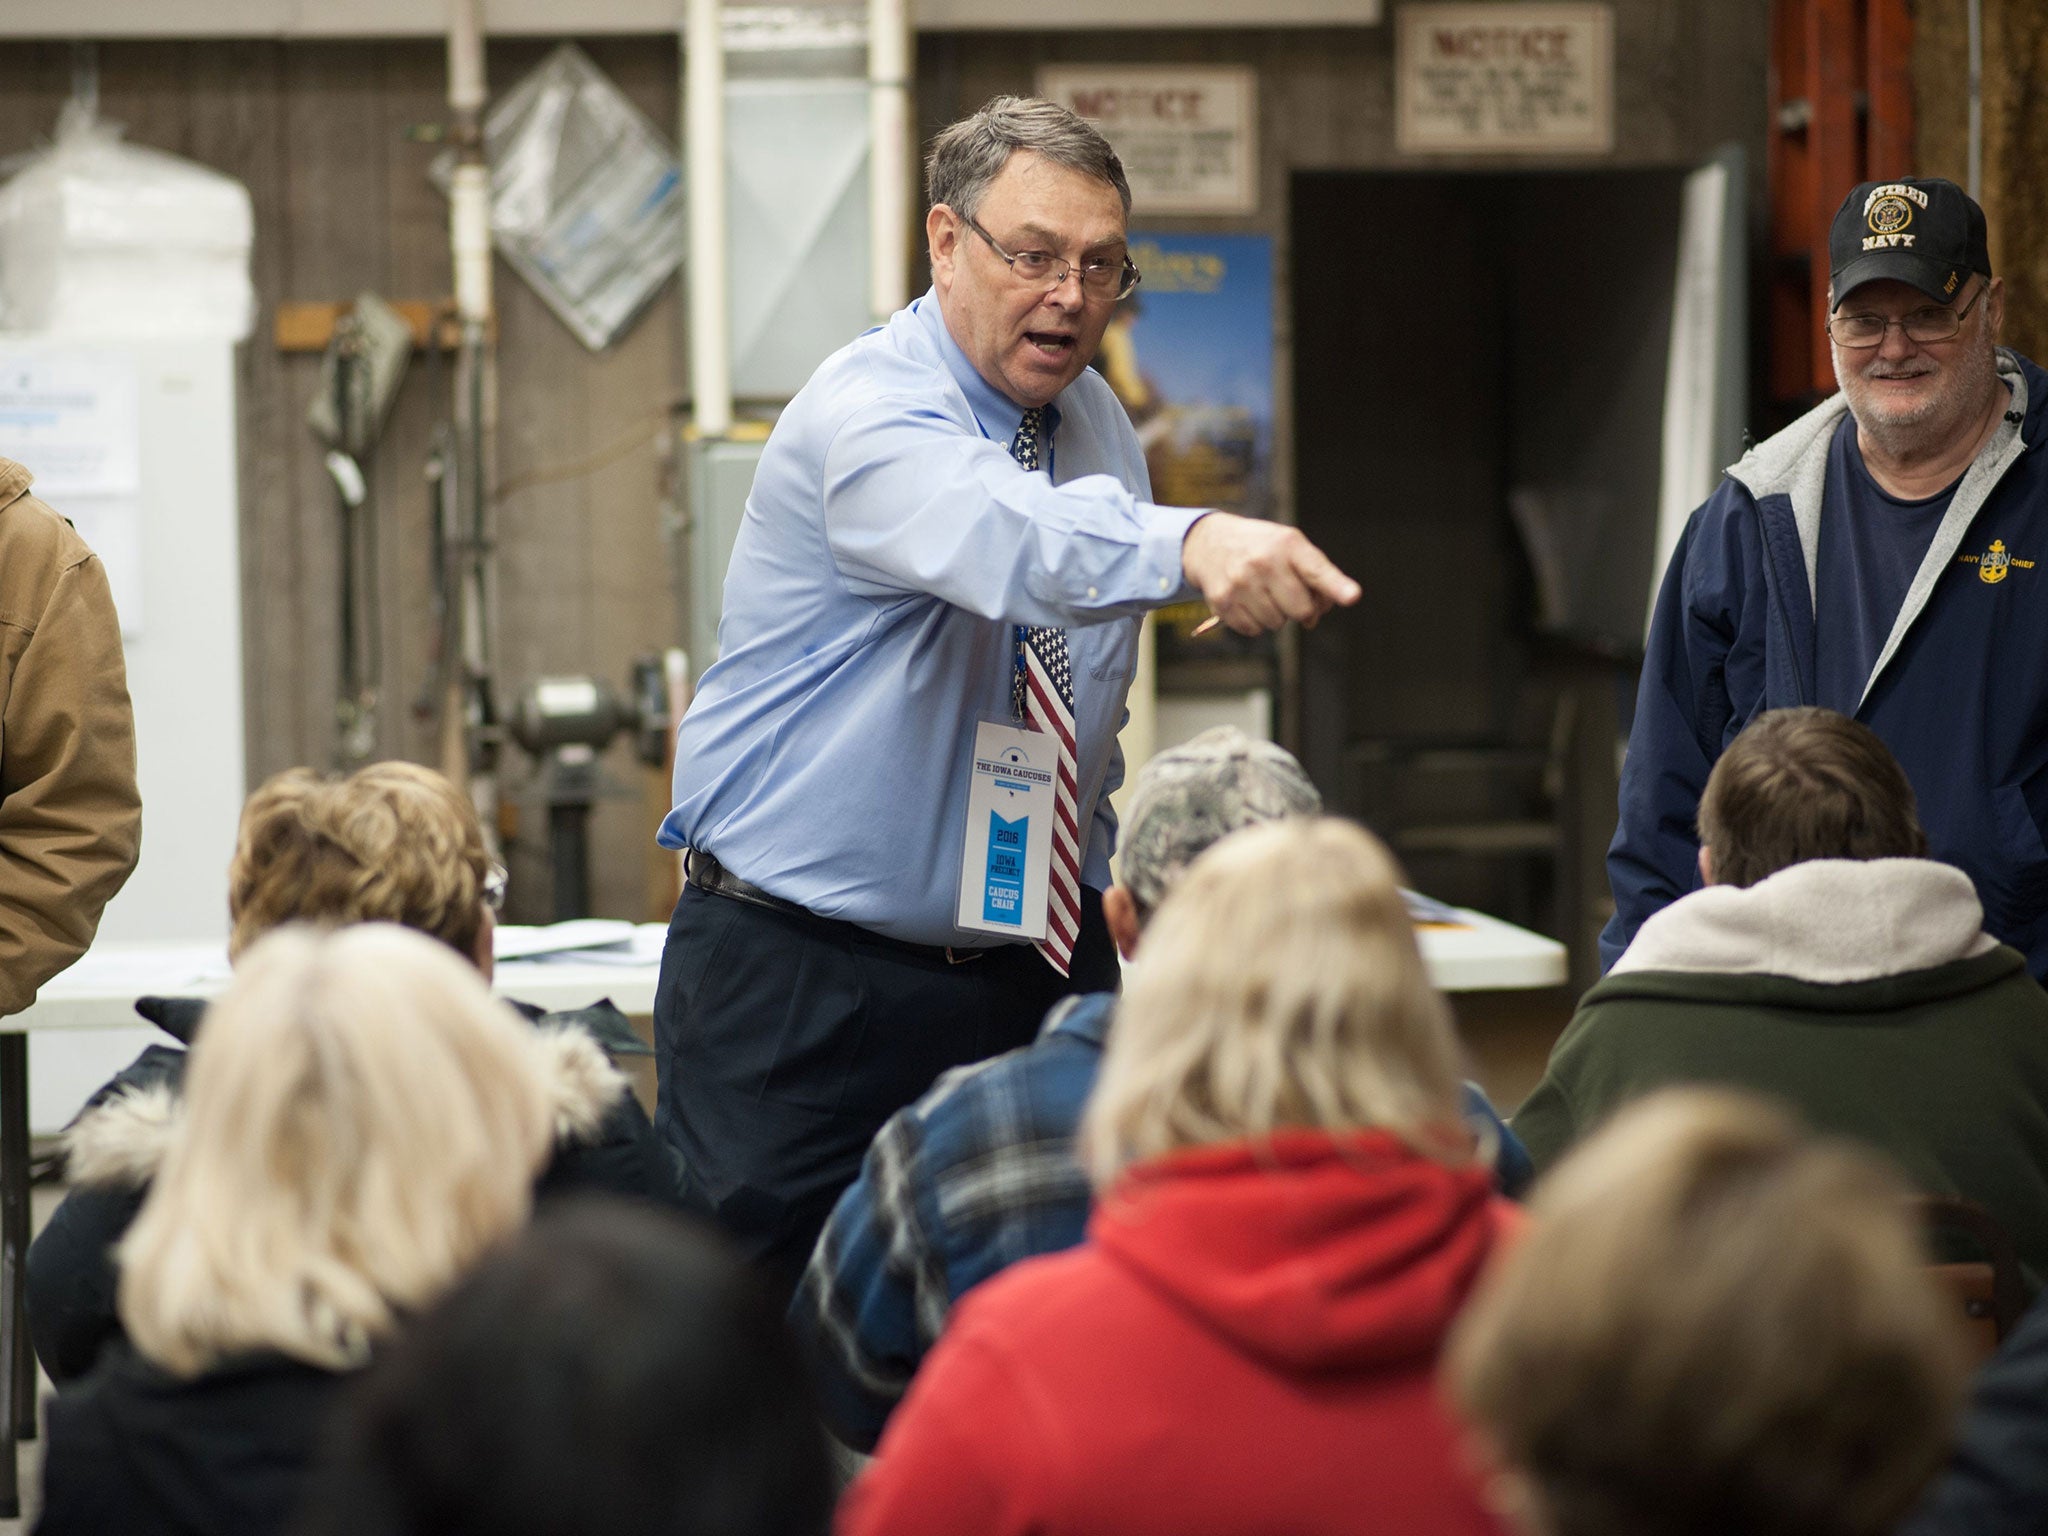 Mike Short, a caucus chairperson, counts caucus attendees at a Democratic Party Caucus at Jackson Township Fire Station on February 1, 2016 in Keokuk, Iowa.